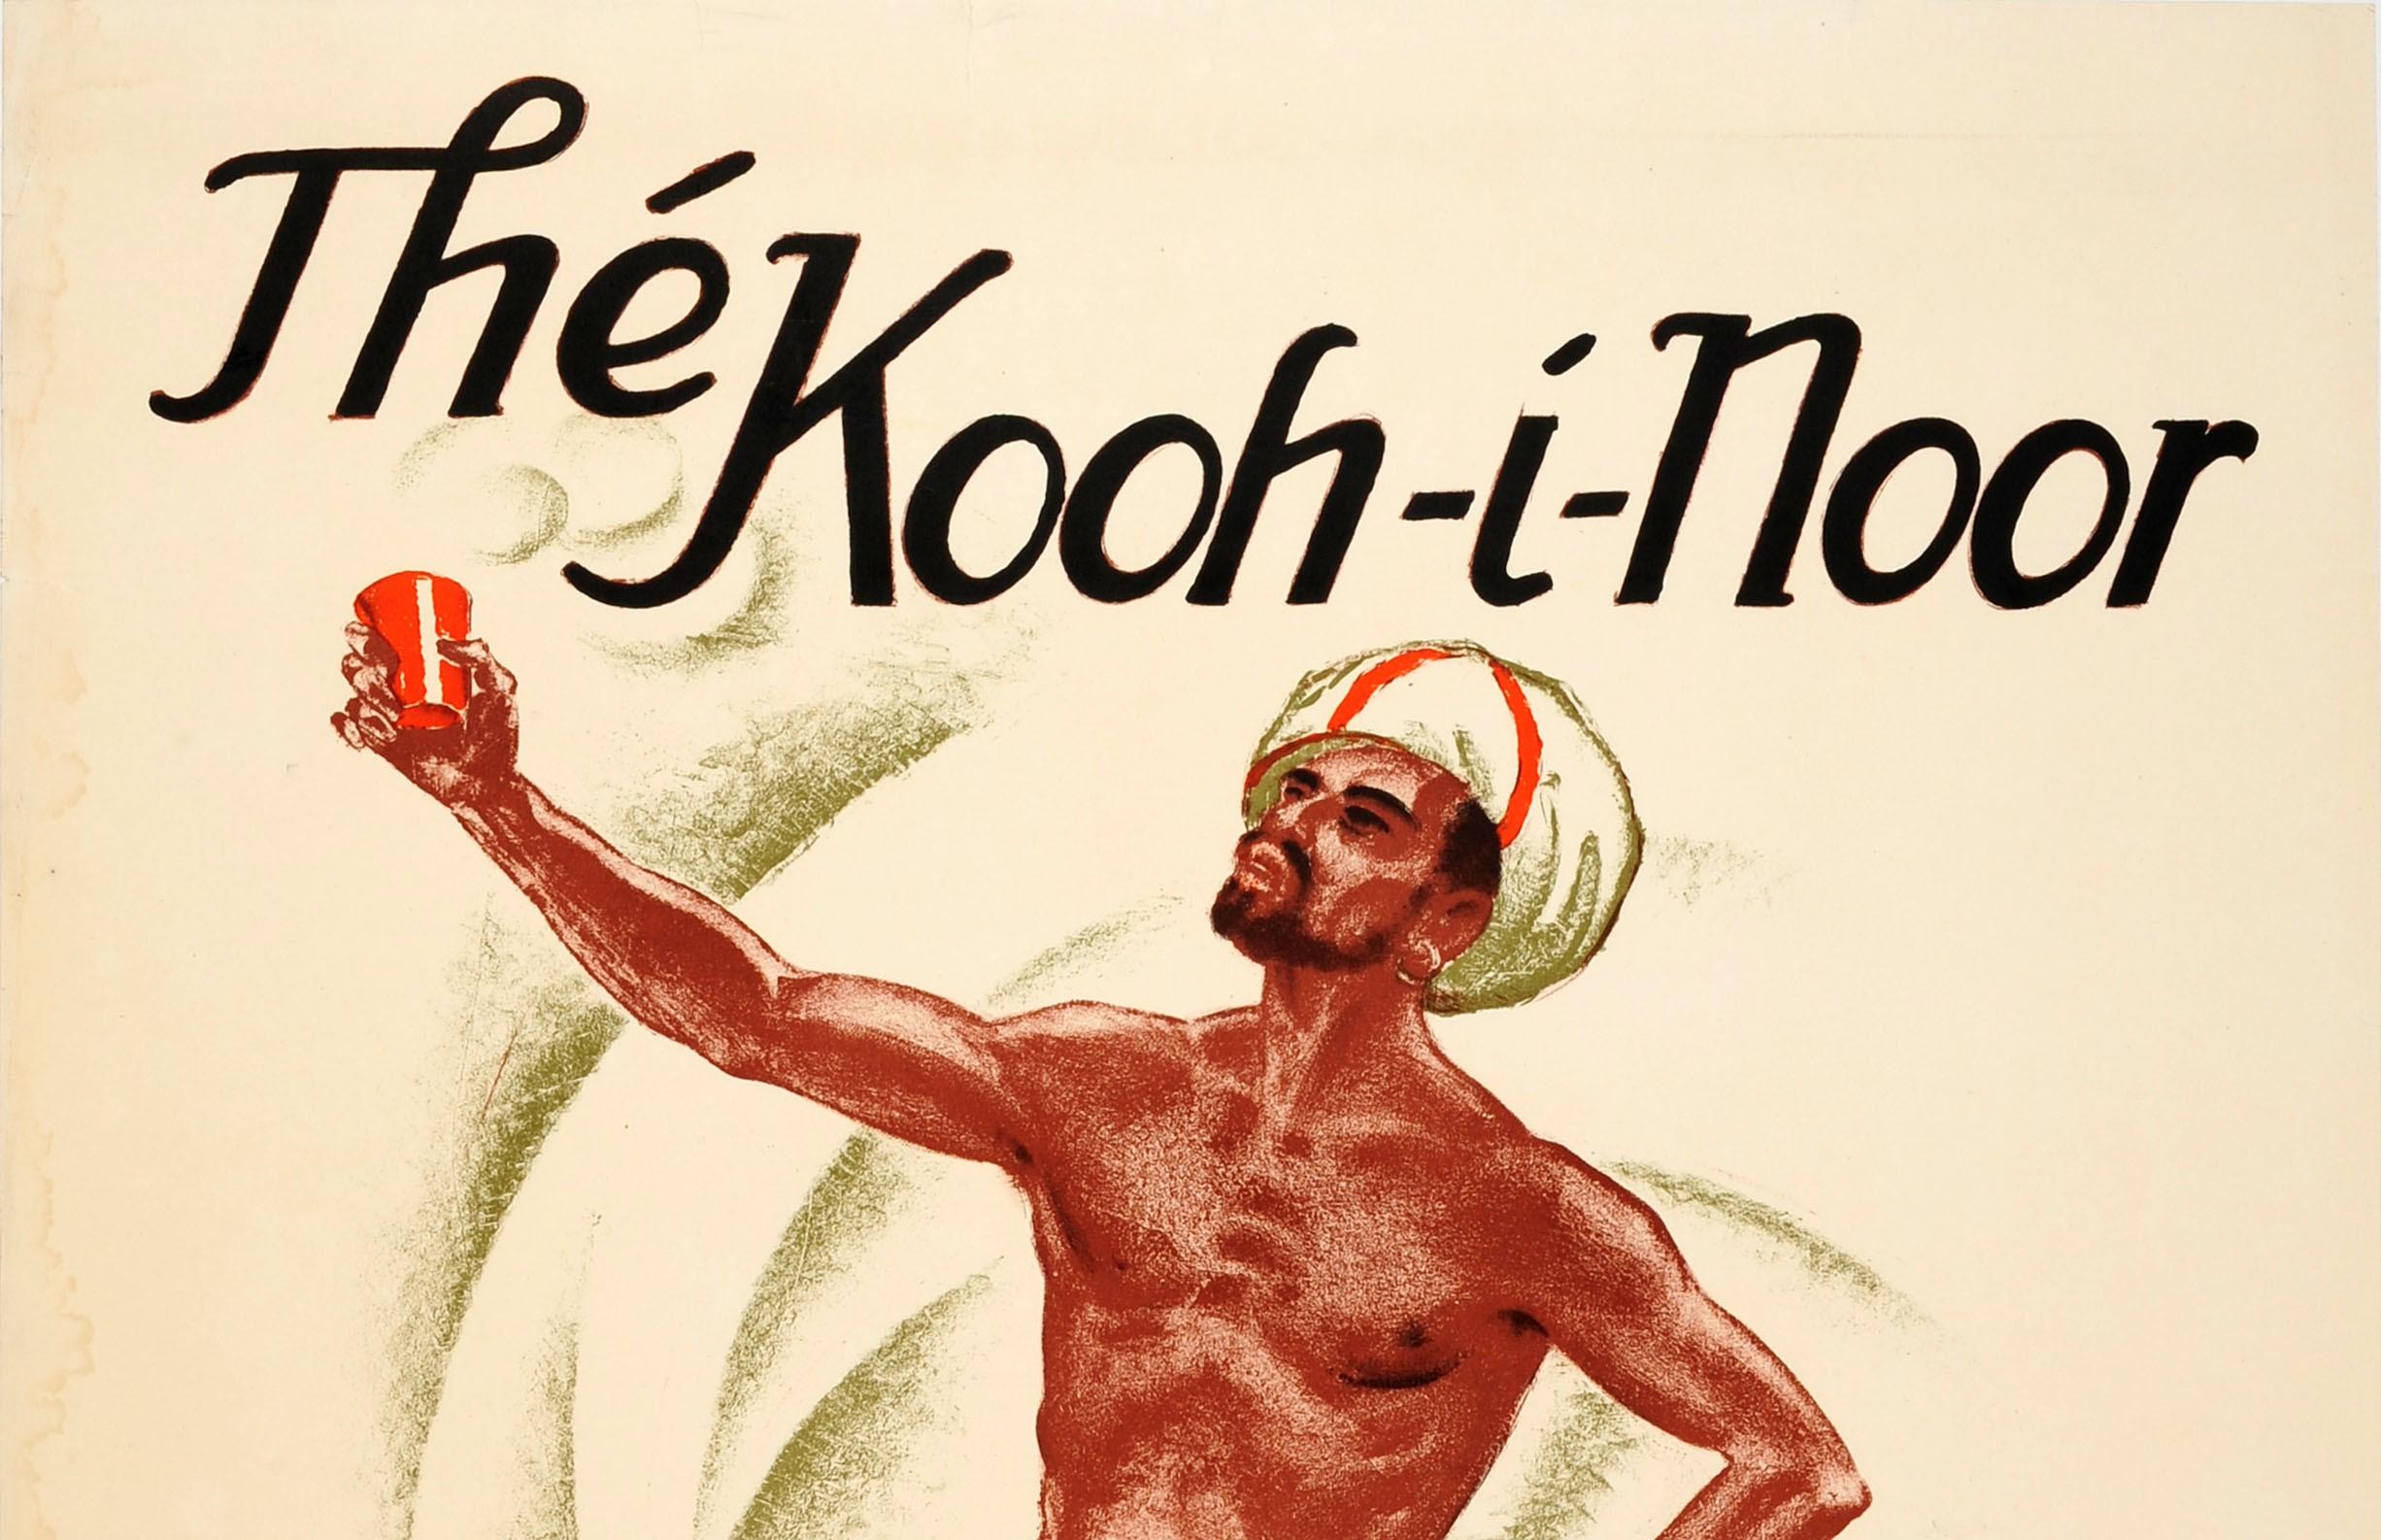 Original vintage tea drink advertising poster for a black tea produced in Sri Lanka (Ceylon): Kooh-i-Noor Ceylon Tea / Thé Kooh-i-Noor Thé de Ceylan. Great illustration of a man wearing a traditional sarong and turban, sitting on a step and holding